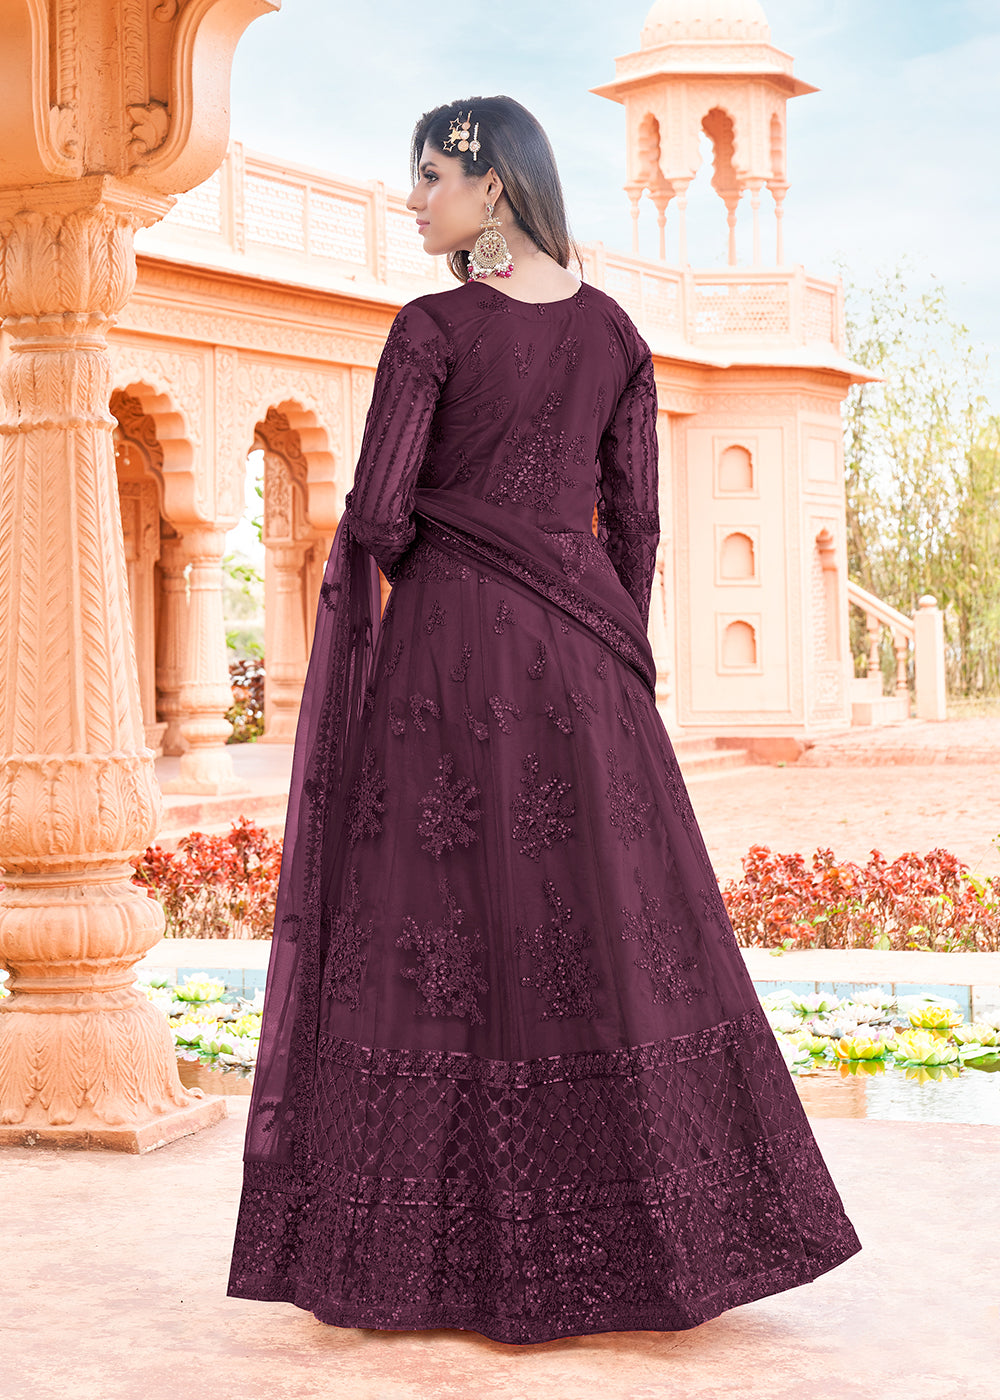 Buy Now Long Length Plum Burgundy Embroidered Net Anarkali Suit Online in USA, UK, Australia, New Zealand, Canada, Italy & Worldwide at Empress Clothing.